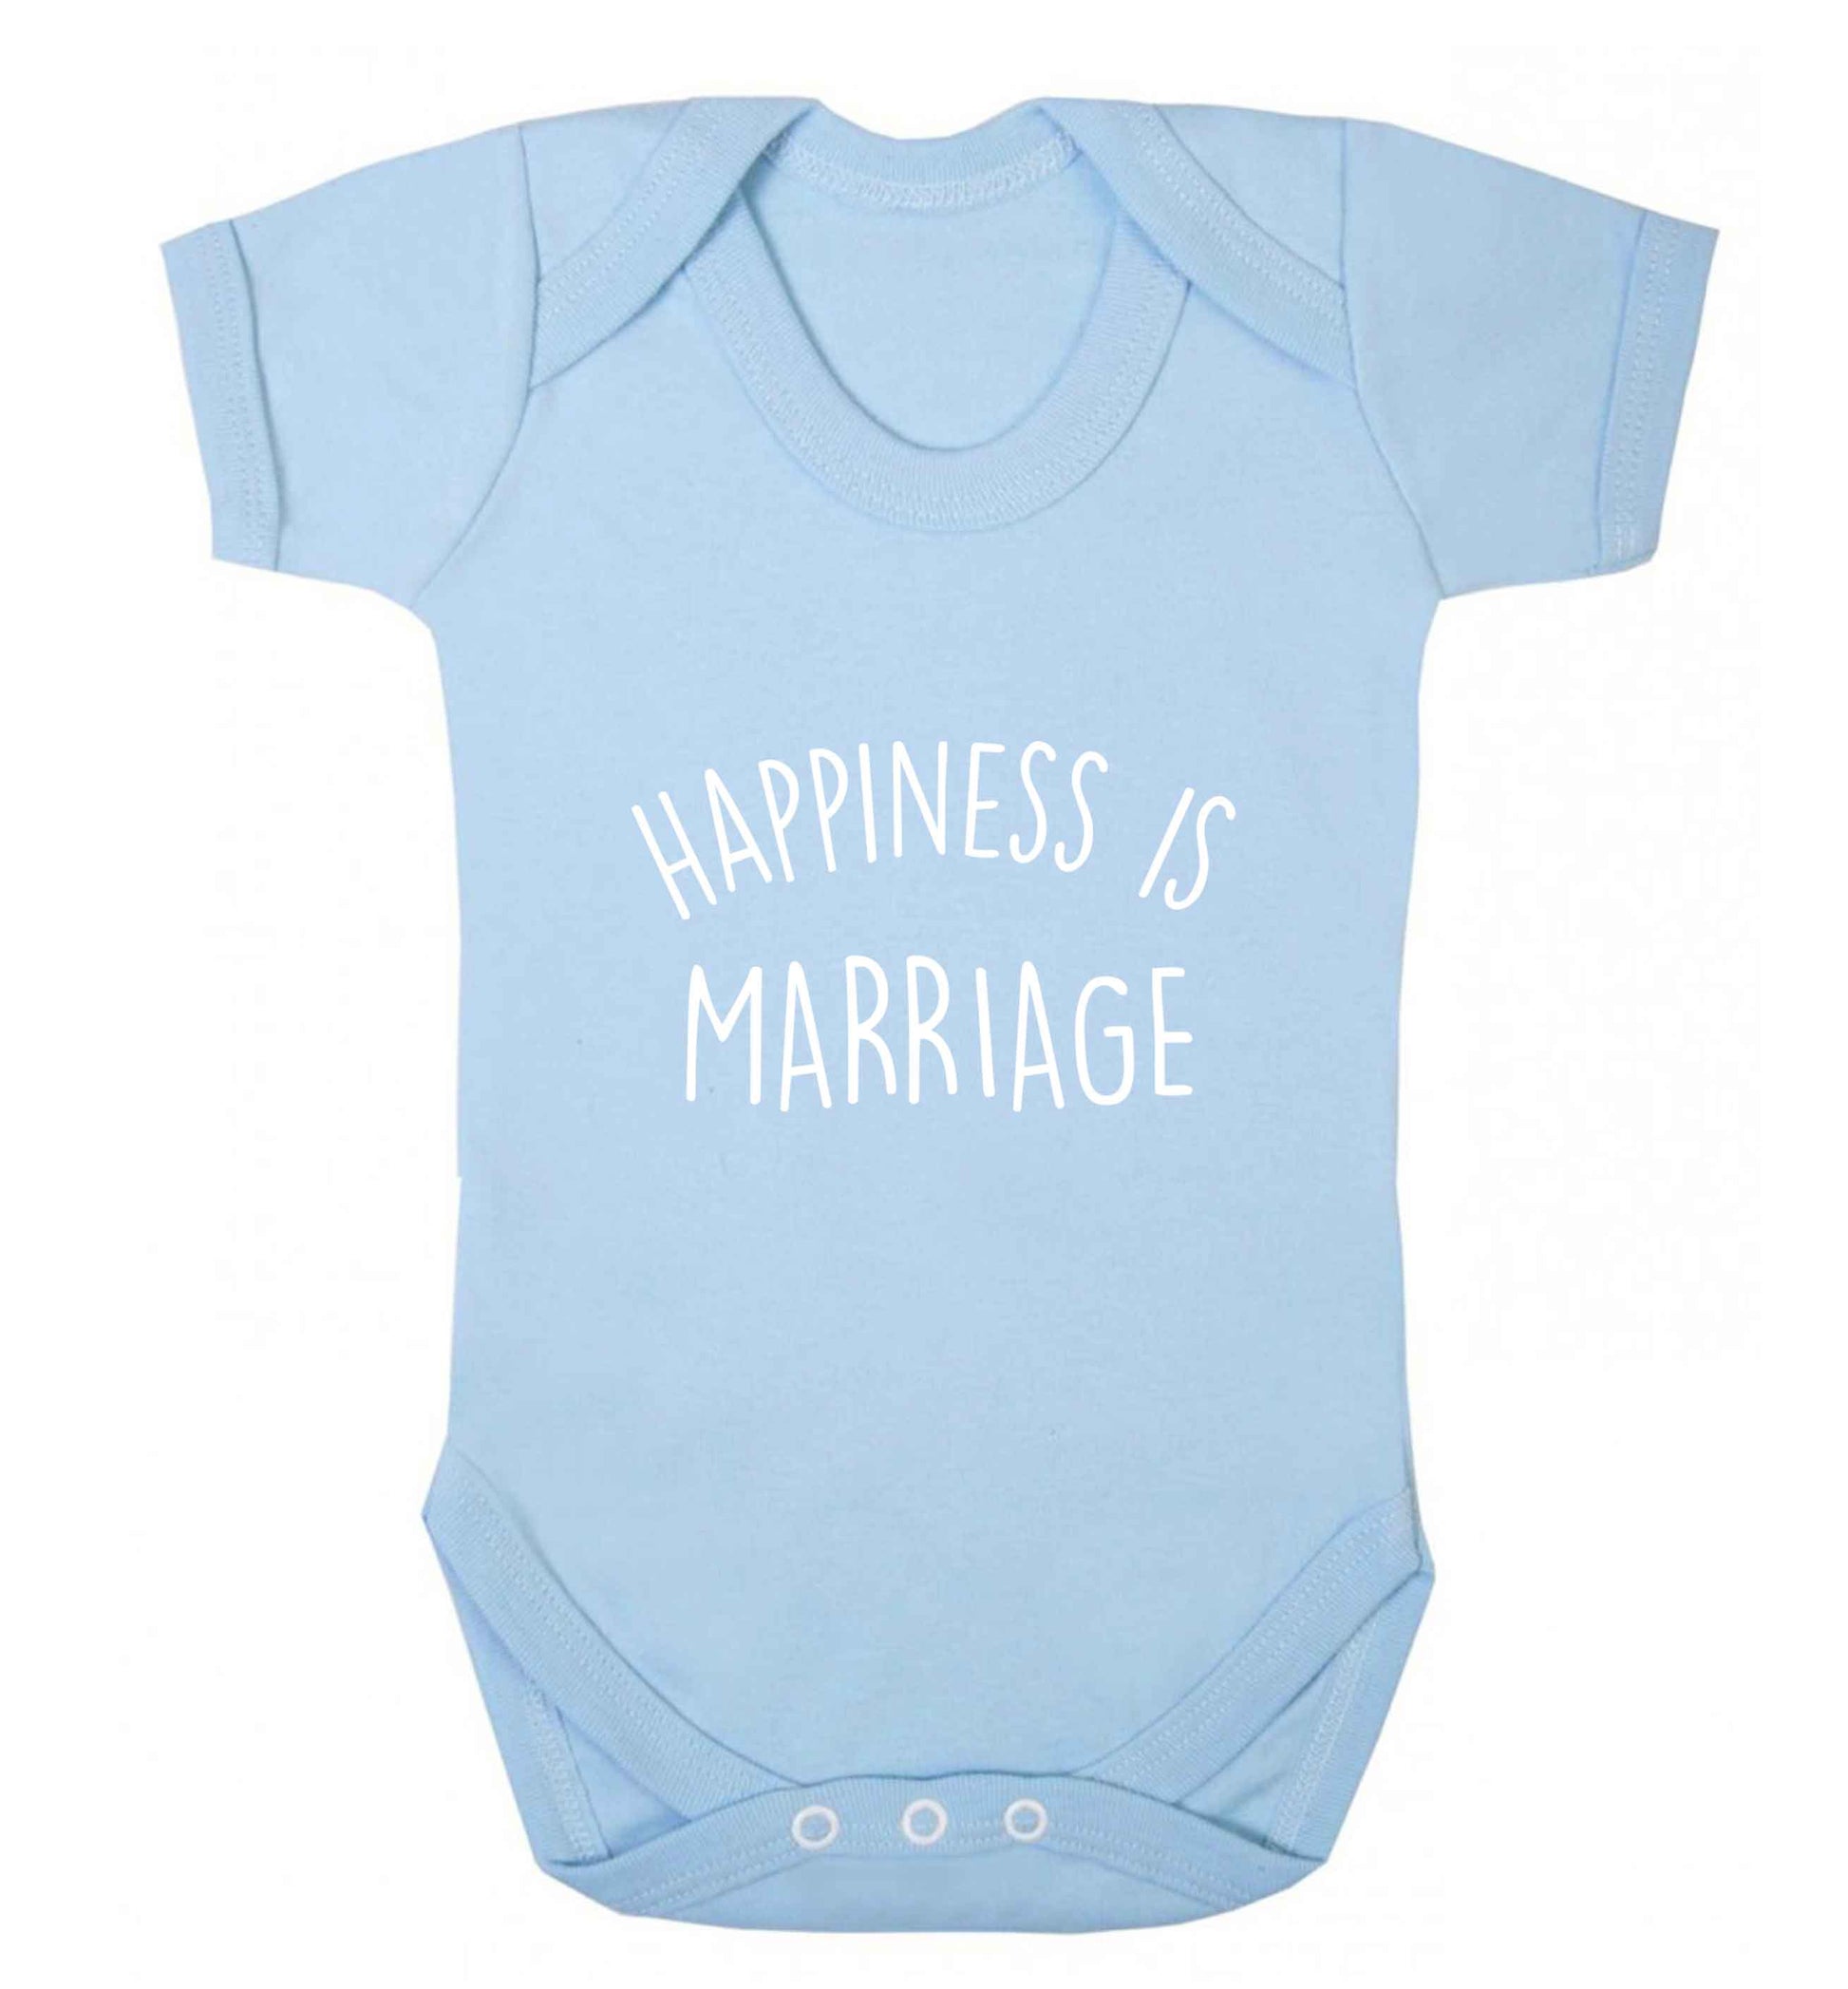 Happiness is wedding planning baby vest pale blue 18-24 months